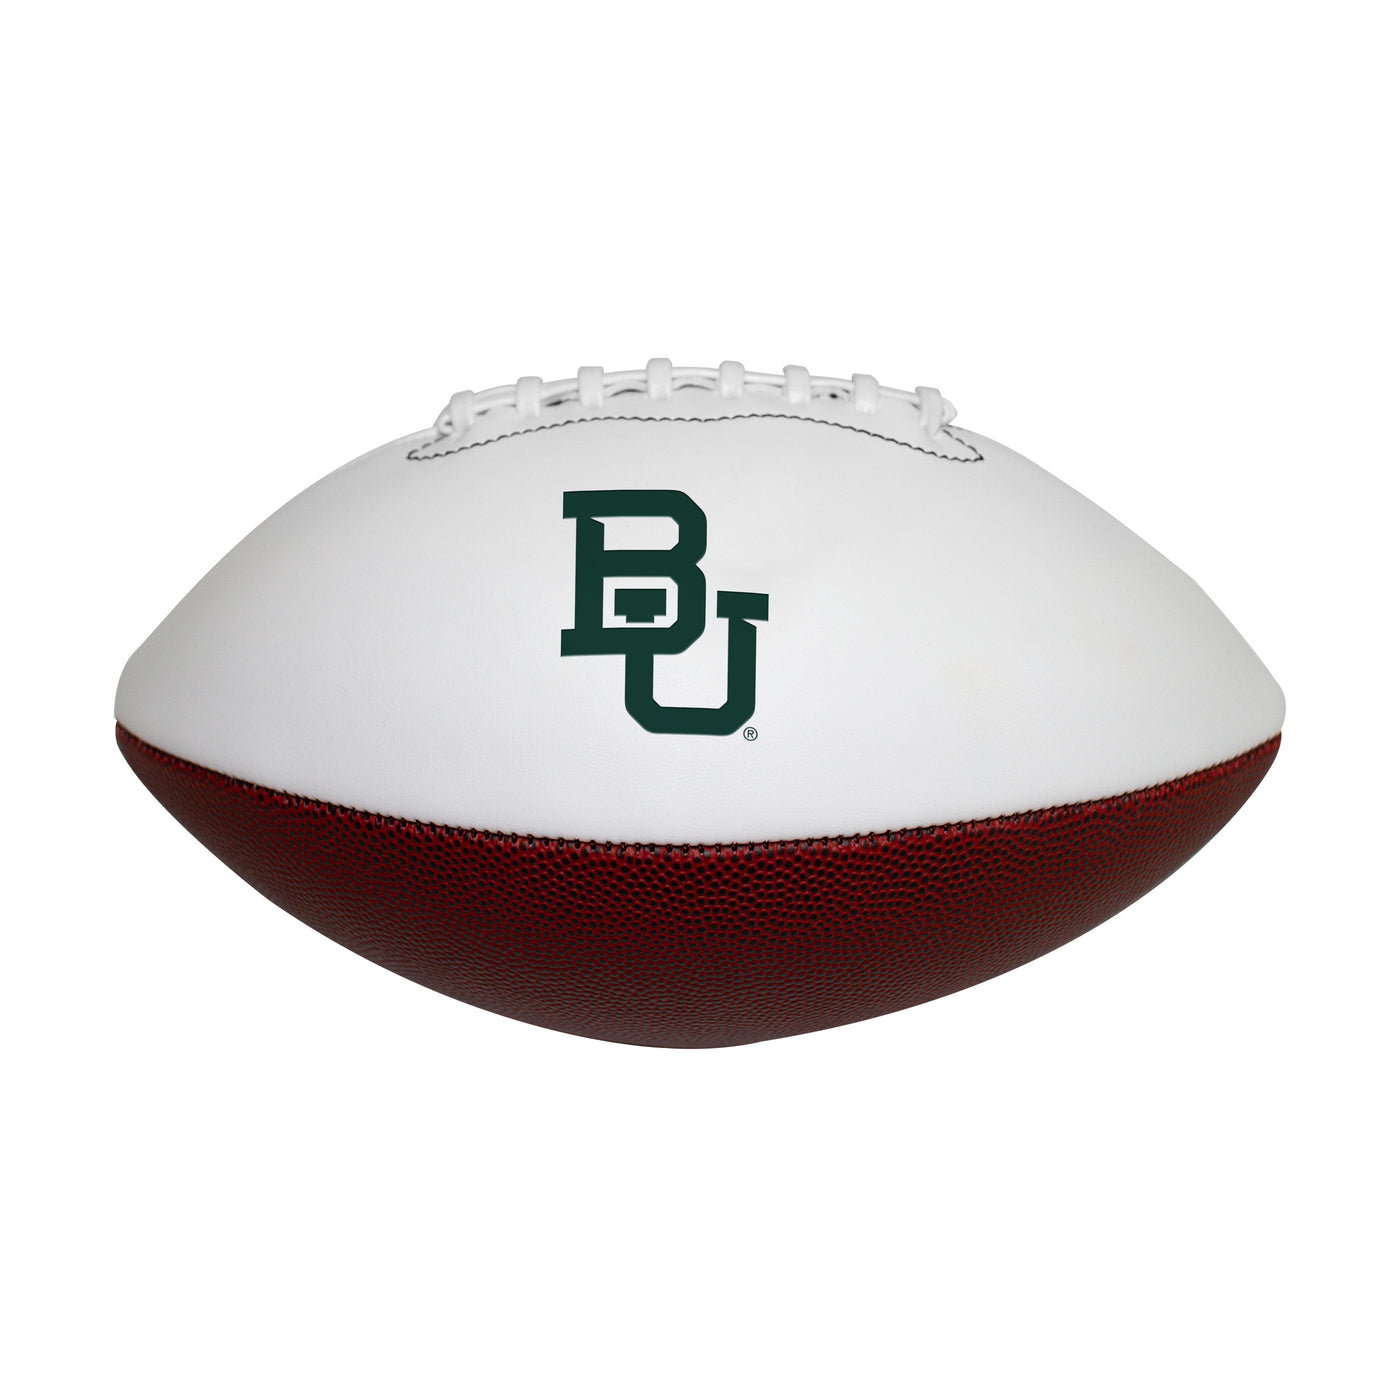 Baylor Official-Size Autograph Football